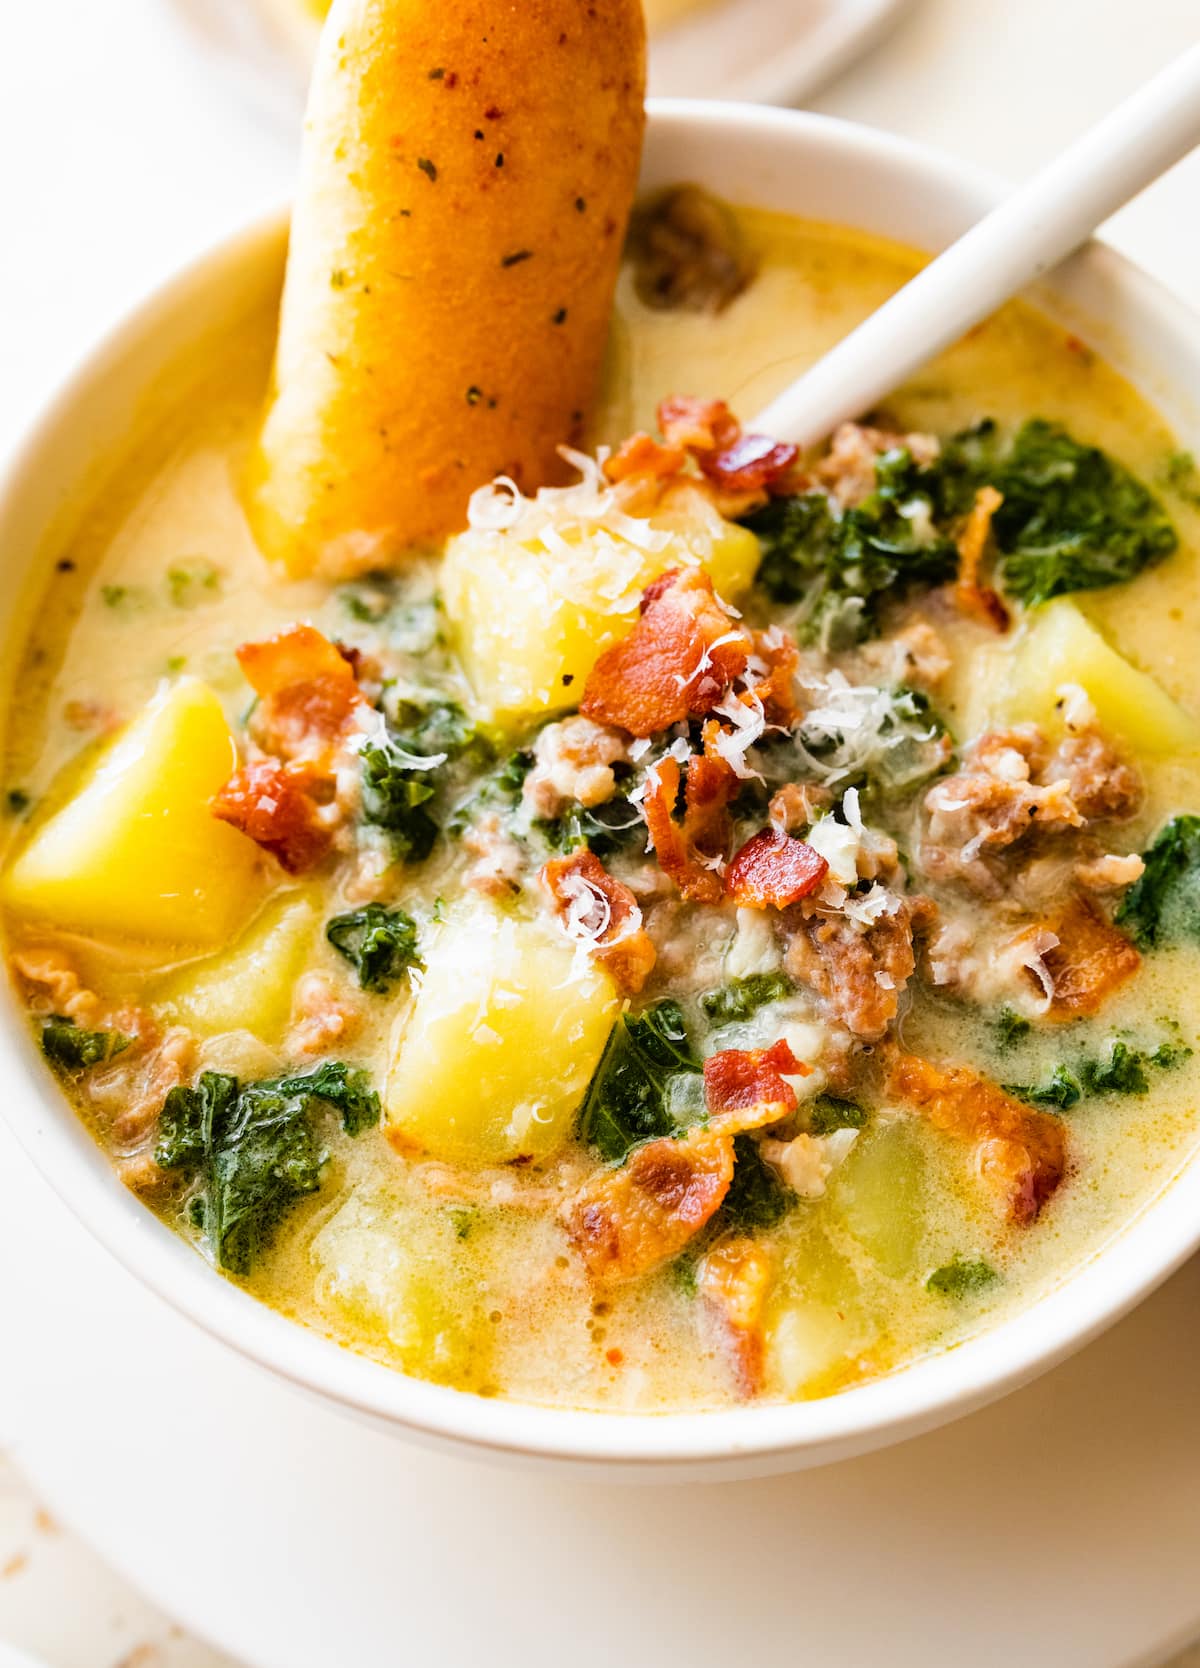 Zuppa toscana soup in a white bowl with a spoon and a roll of bread inside the soup.